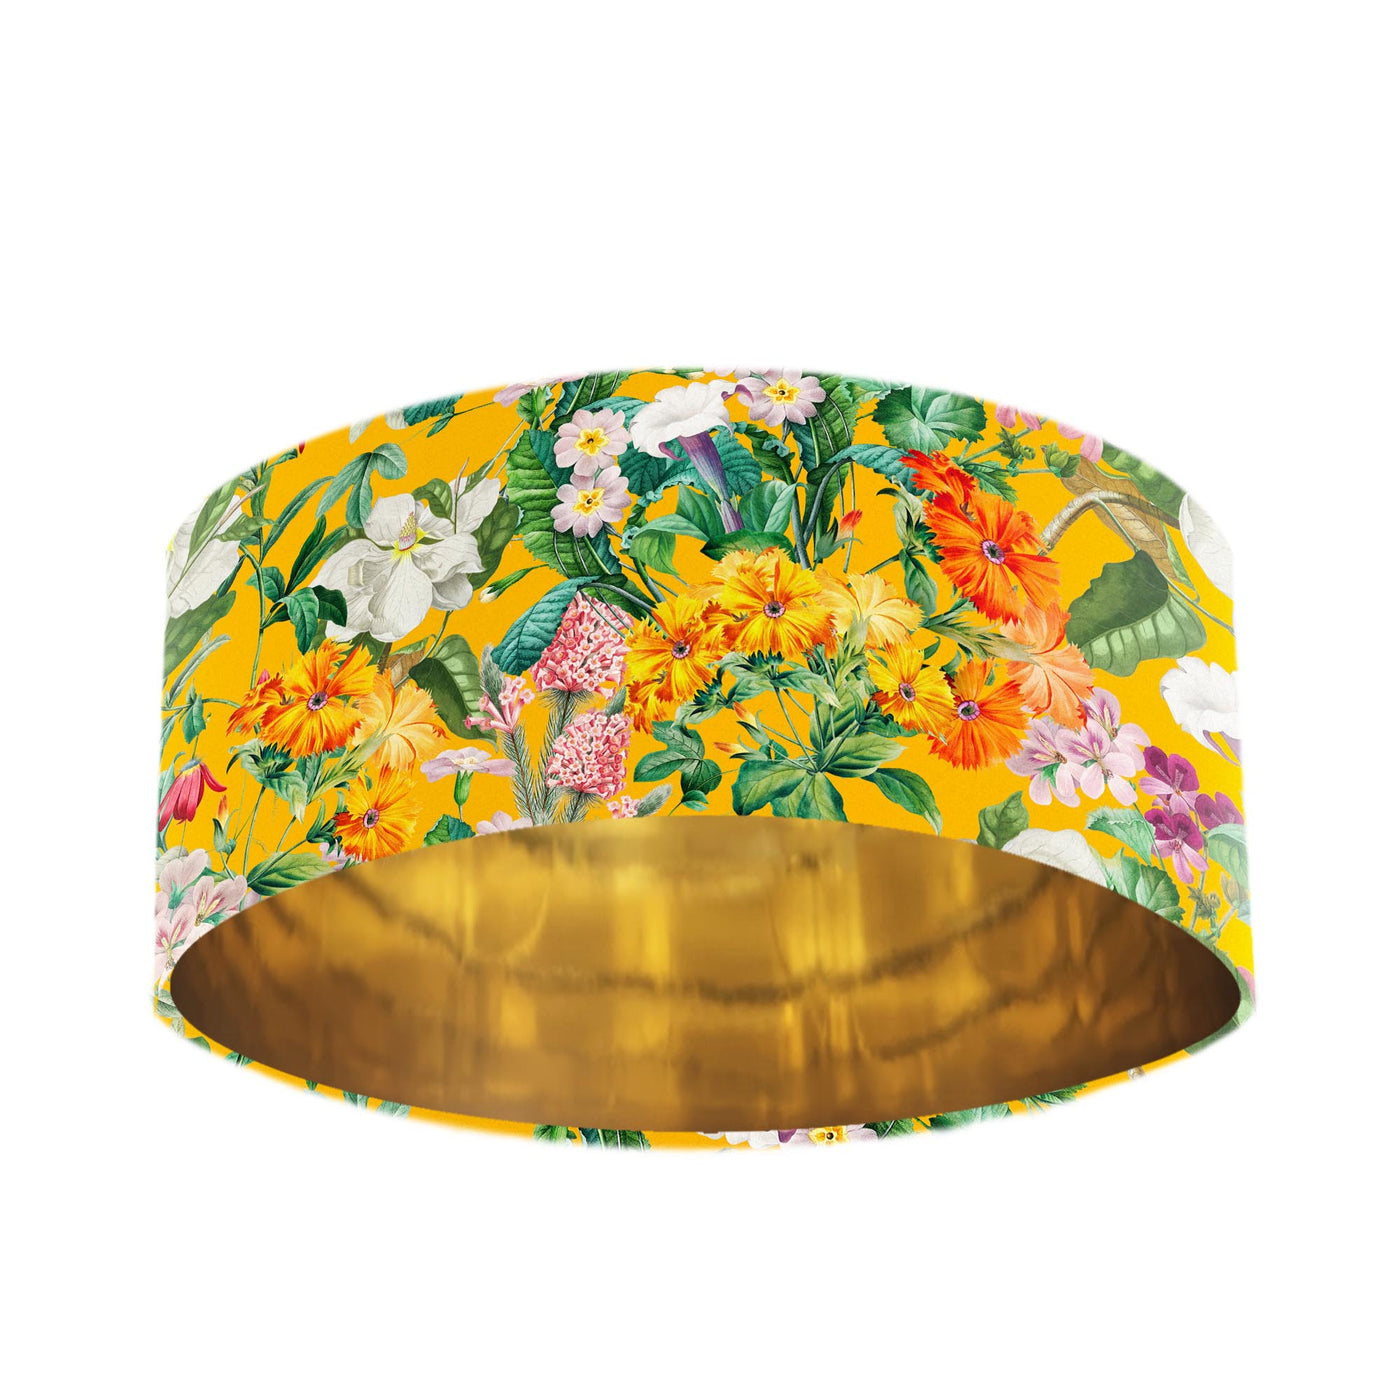 Meadow velvet lamp shade in sunshine yellow with gold lining